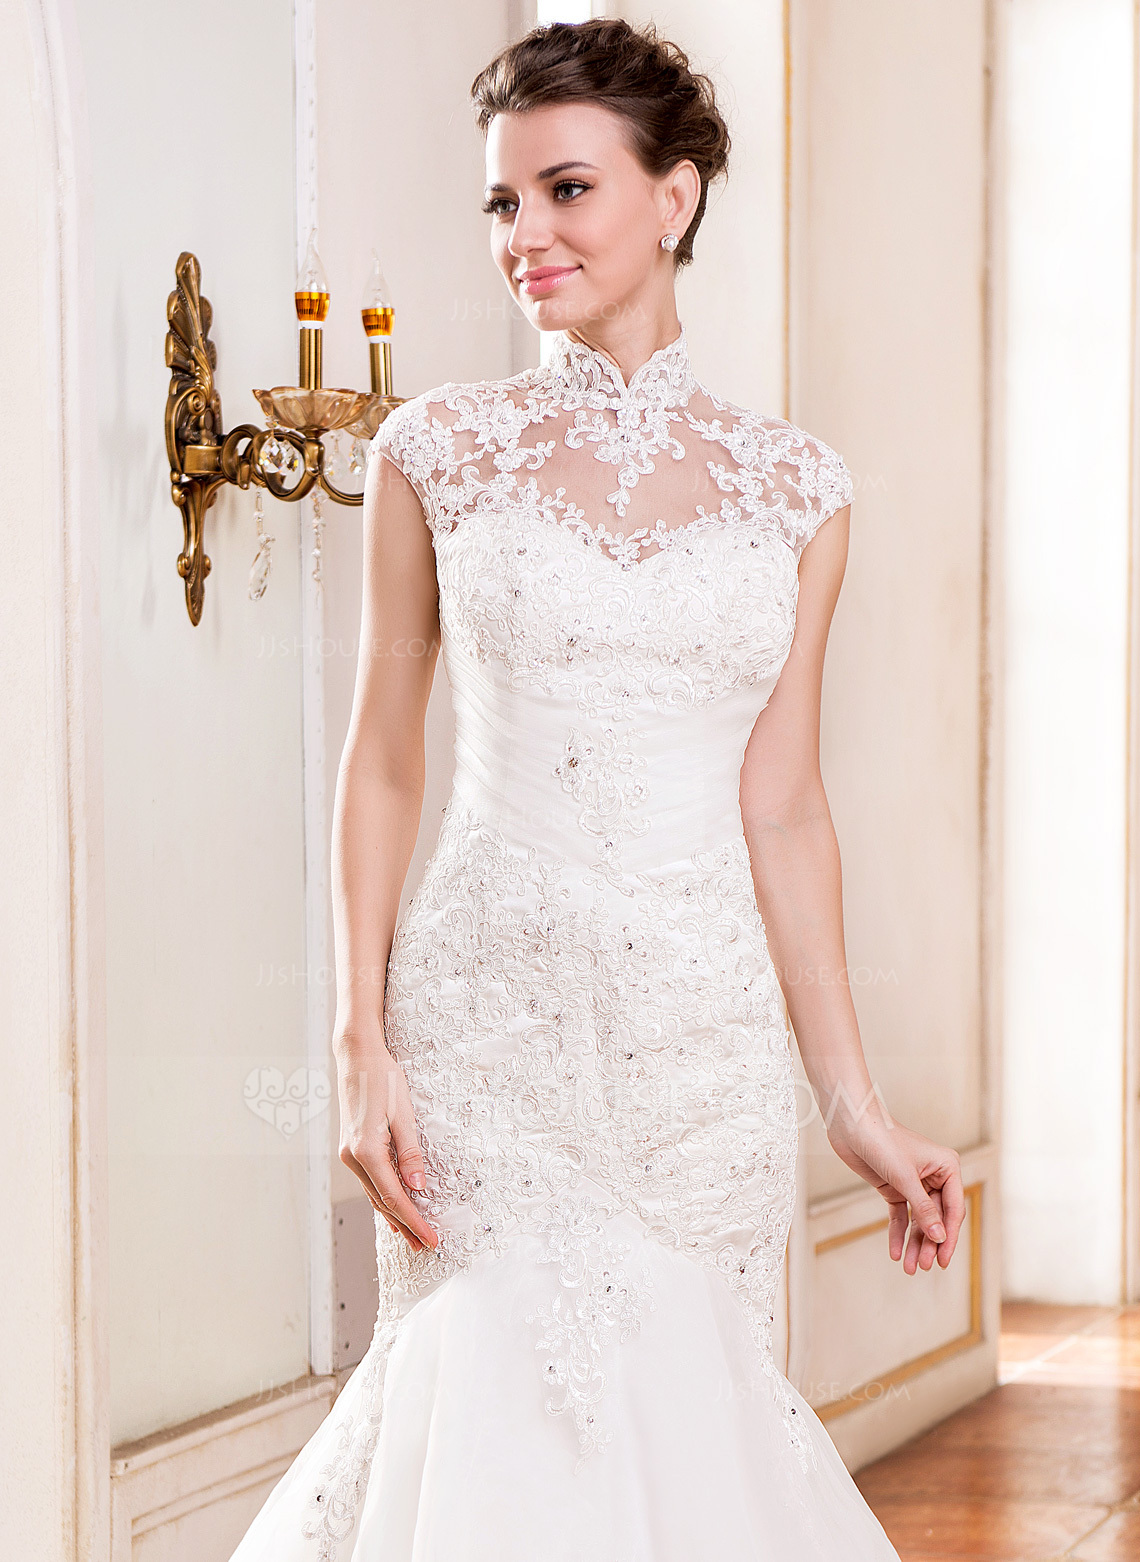 Top Jjs Wedding Dresses  The ultimate guide 